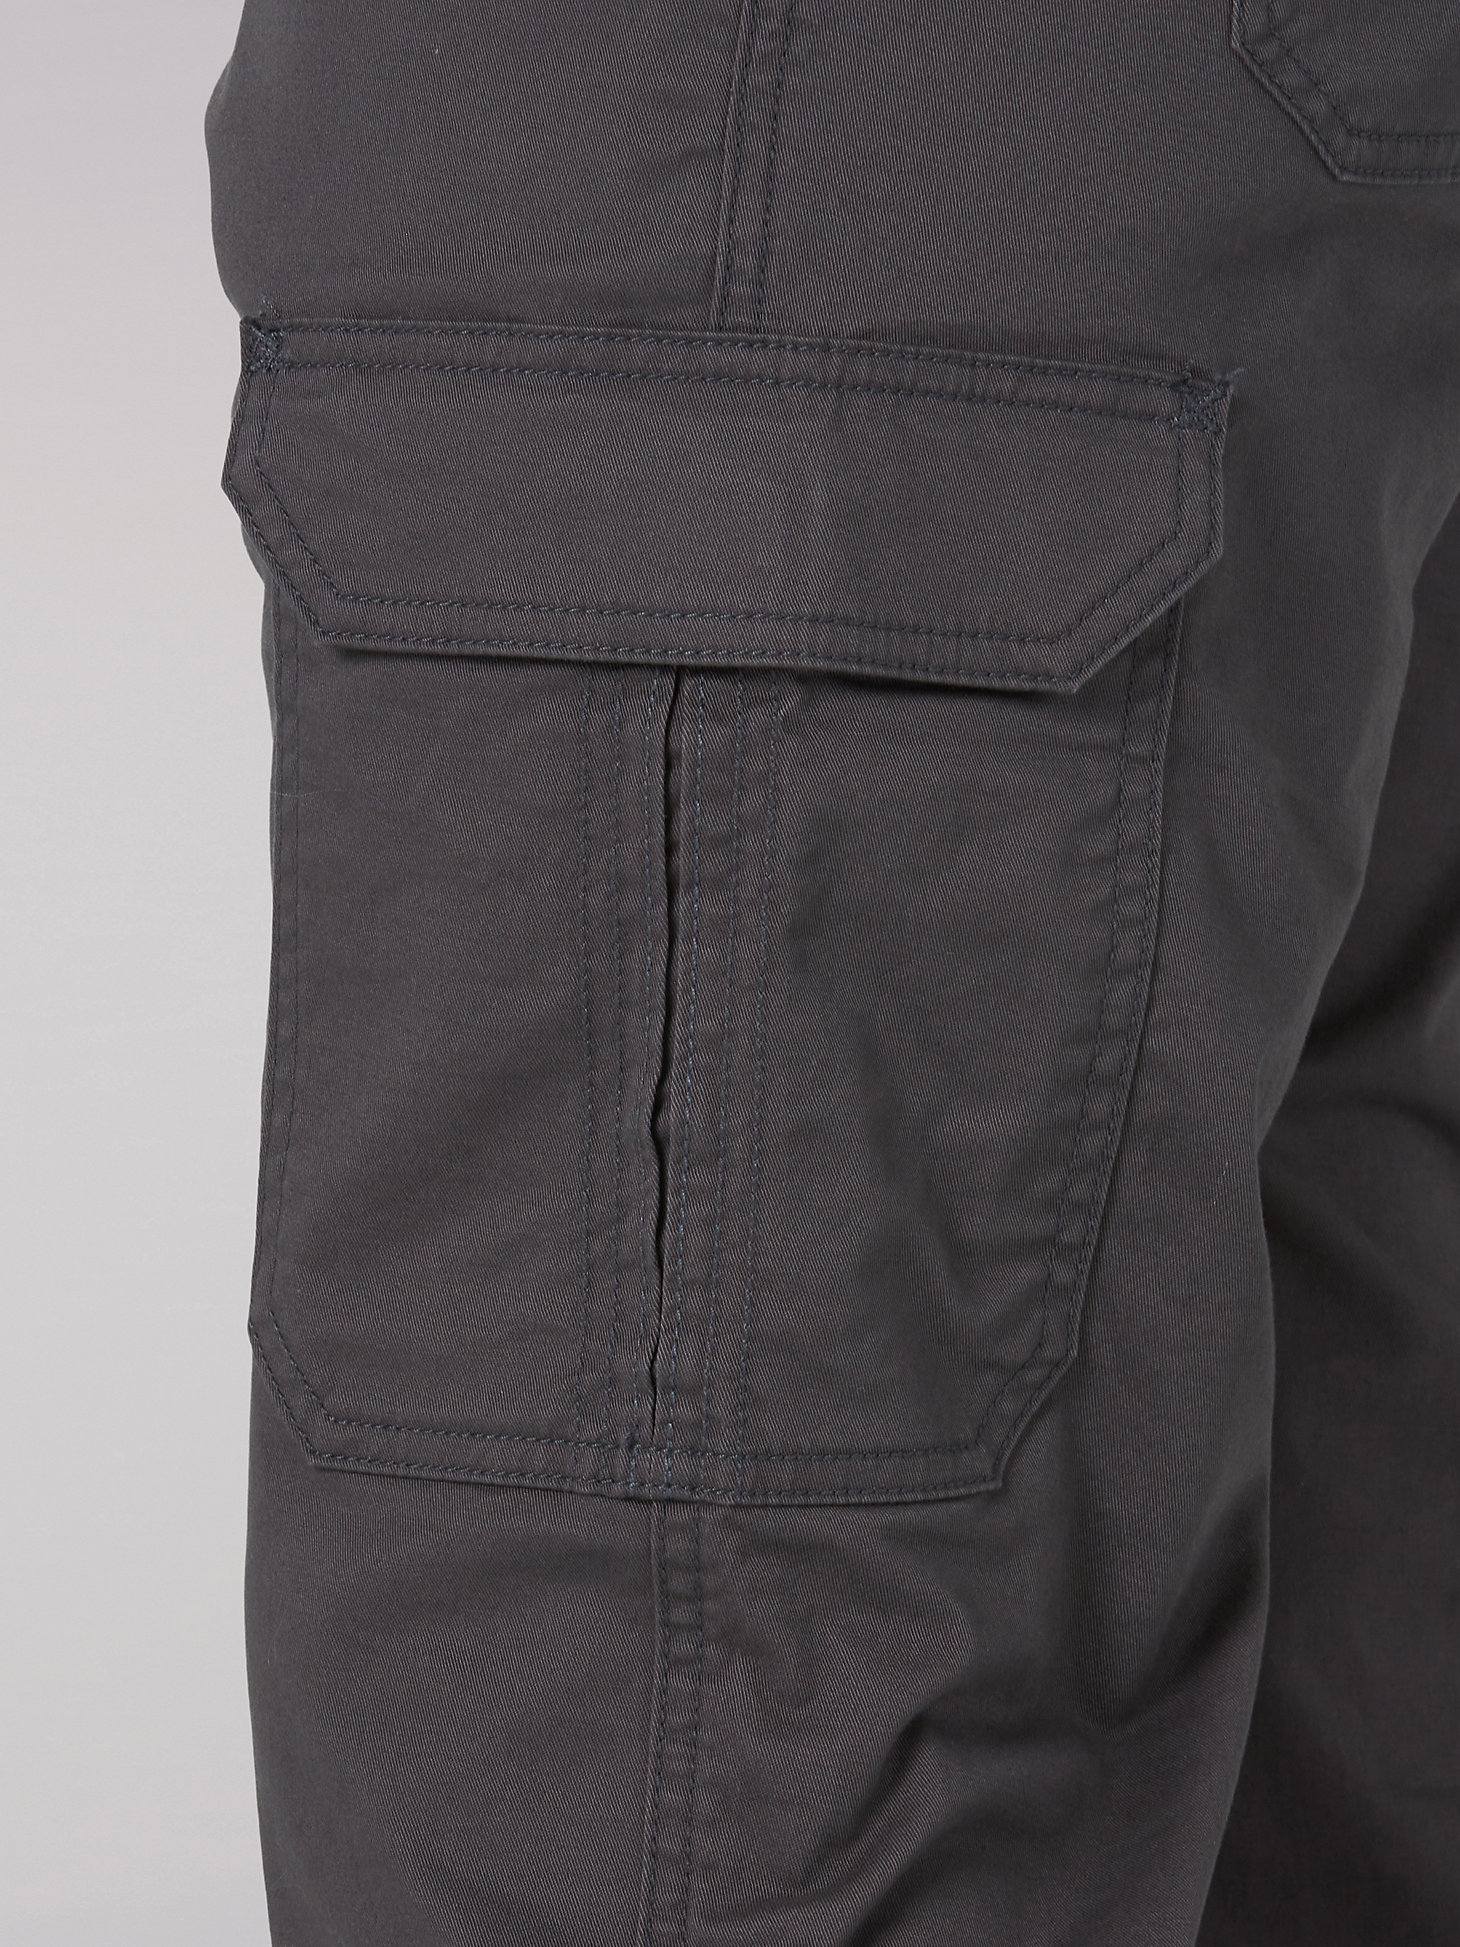 Men's Extreme Comfort Cargo Twill Pant in Charcoal alternative view 6